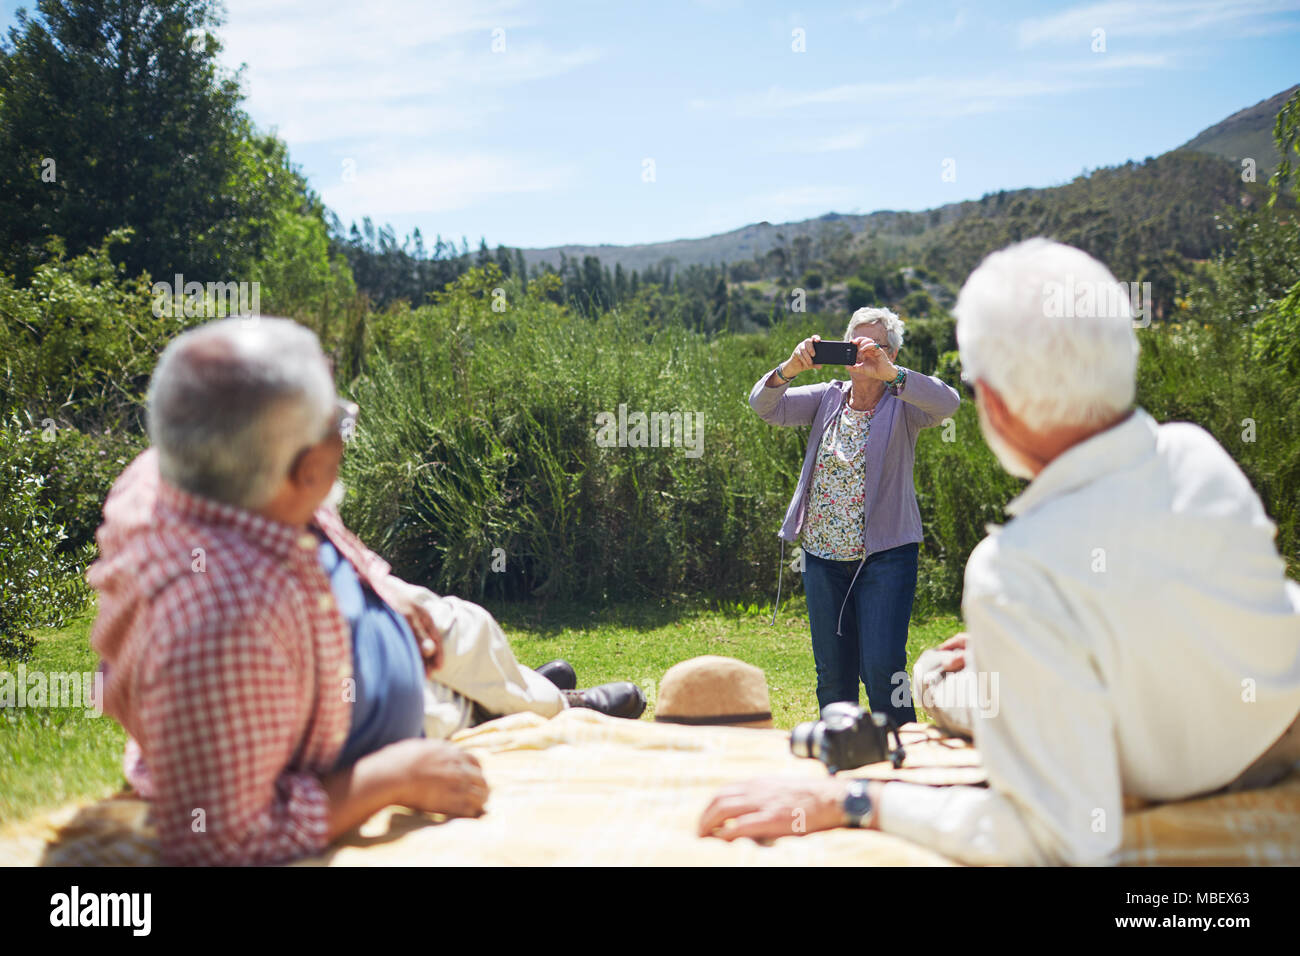 Active senior woman with camera phone photographing men relaxing on sunny summer picnic blanket Stock Photo